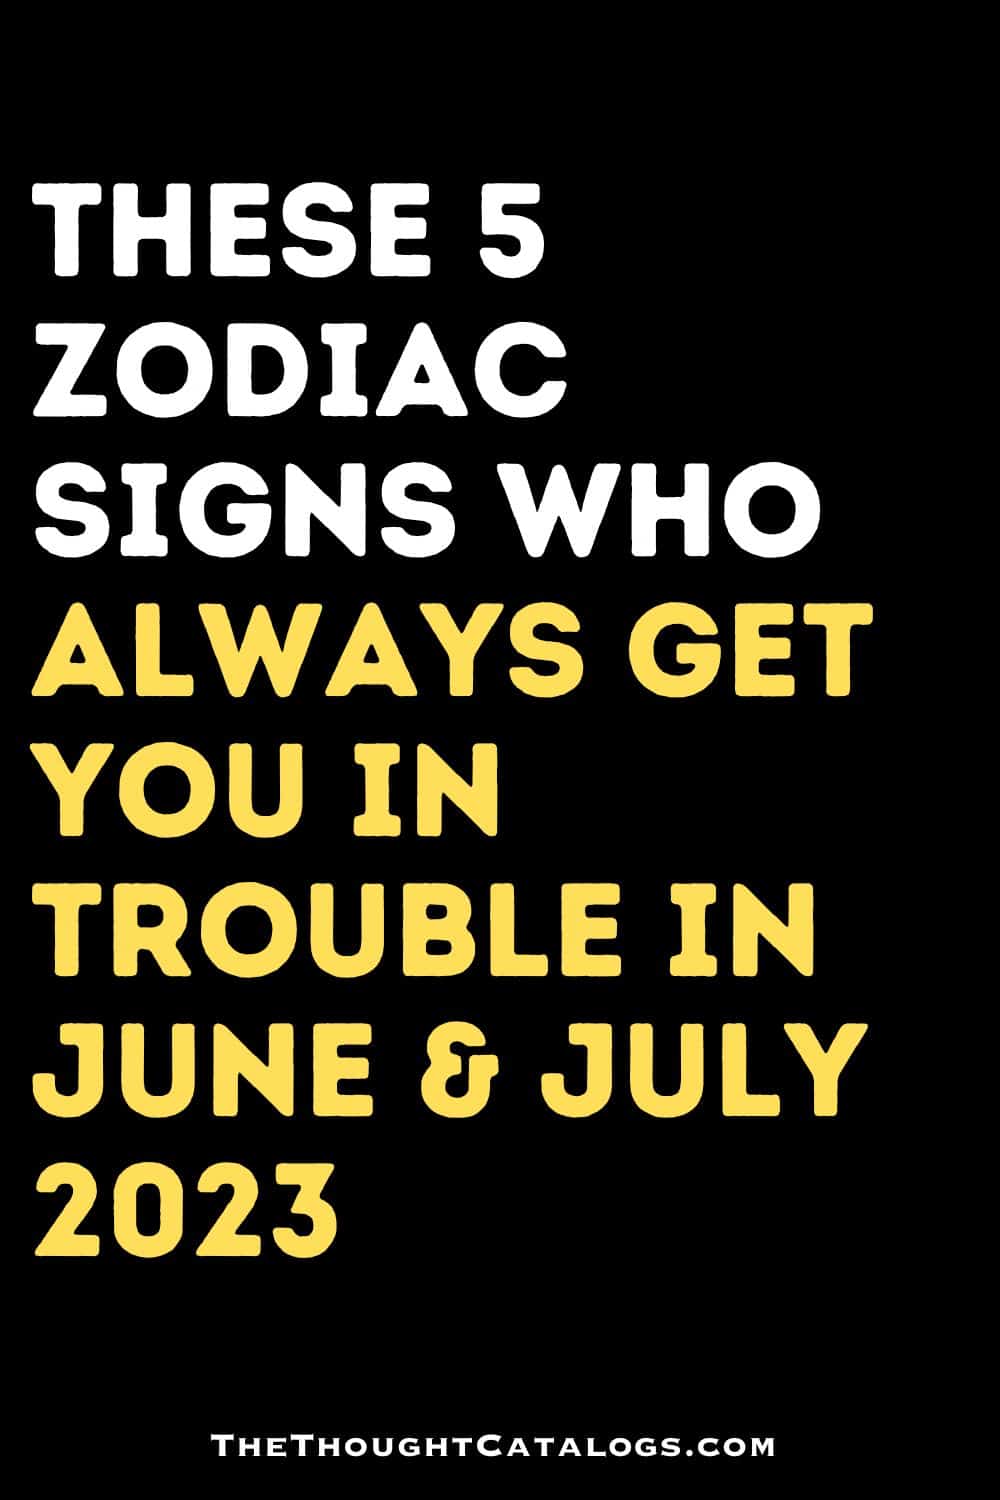 Zodiac Signs Who Always Get You In Trouble In June & July 2023